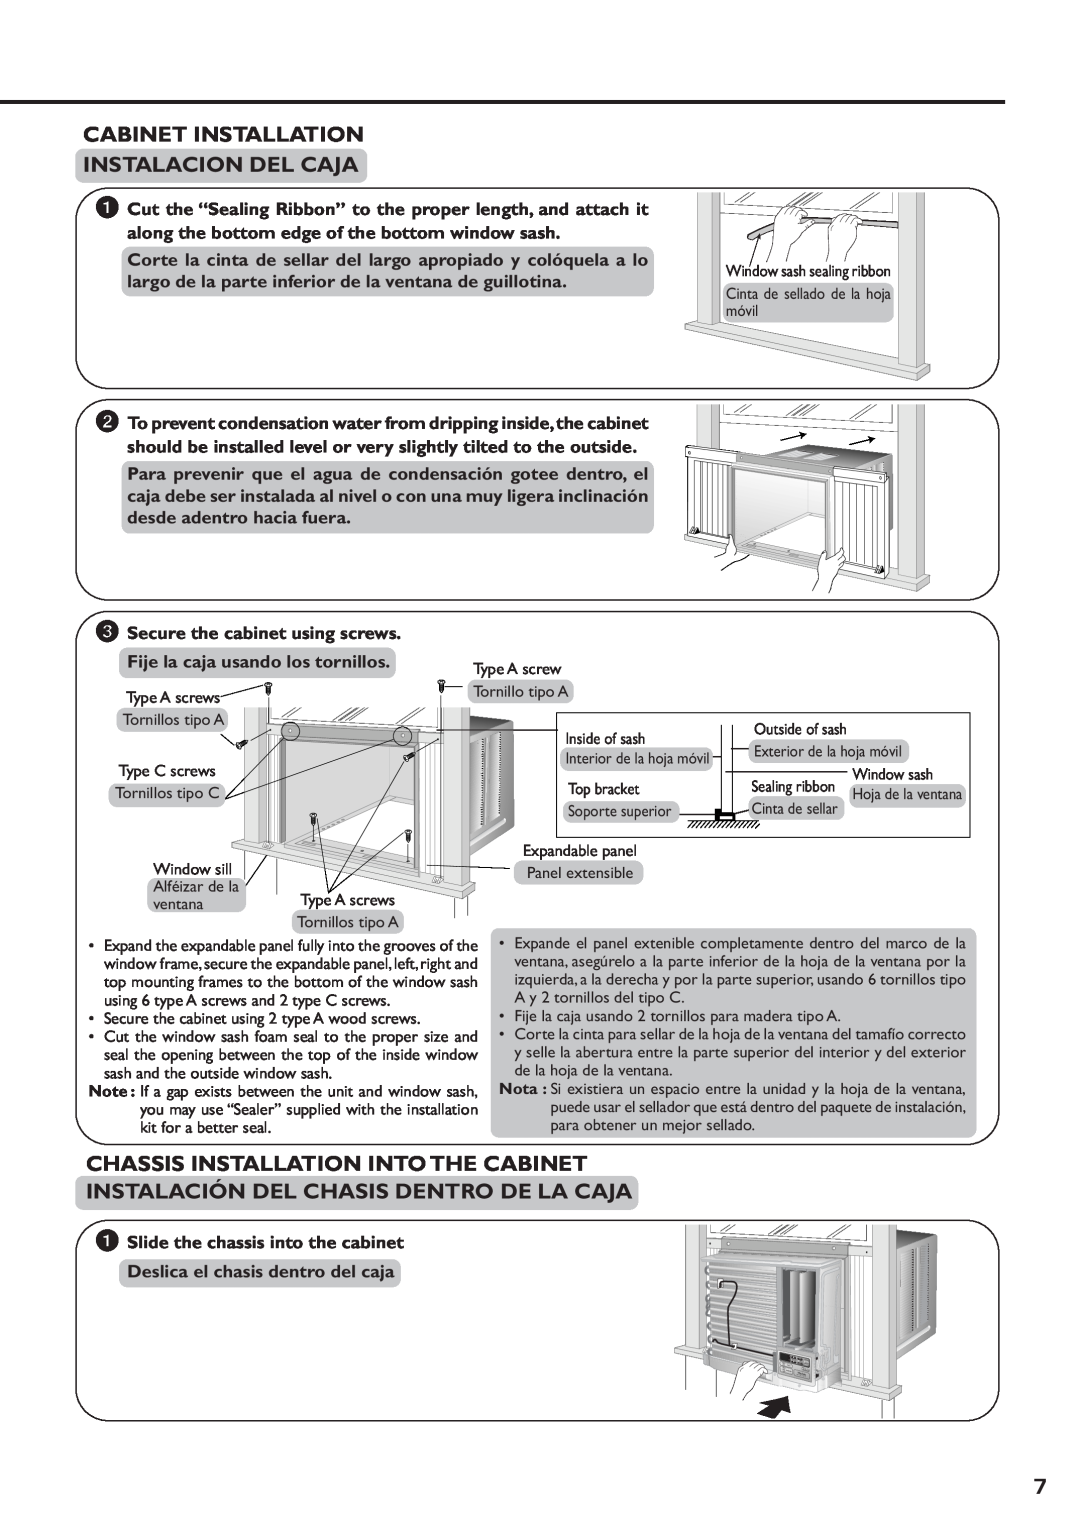 Panasonic CW-XC83YU specifications Cabinet Installation Instalacion Del Caja, Chassis Installation Into The Cabinet 